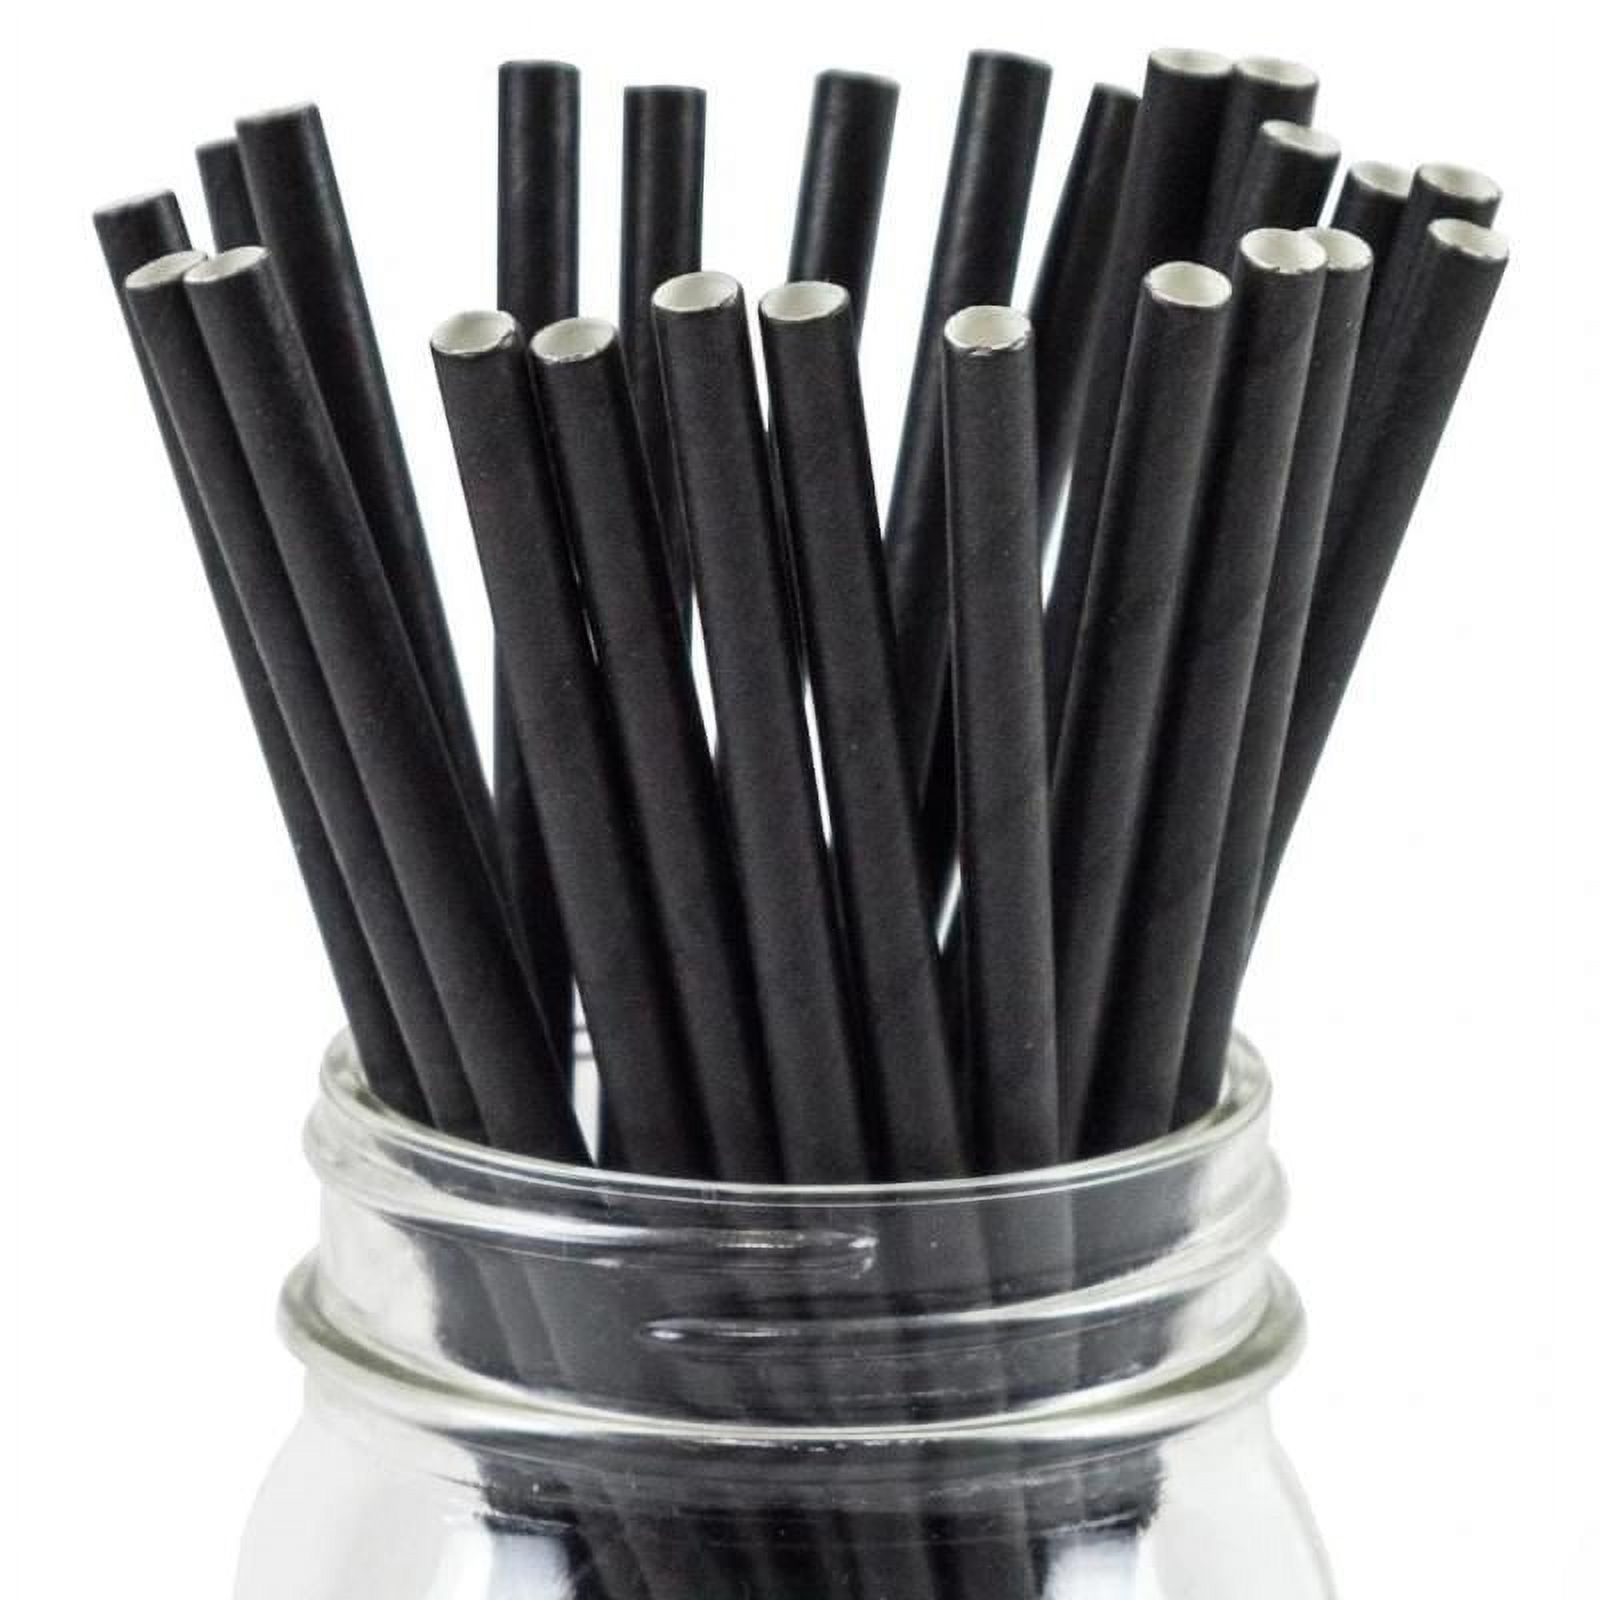 Paper Straws, Tall 500 pcs Free Shipping, Black Wrapped, 9.25 inc x .24 inch, Eco Friendly, Biodegradable, Disposible, Commercial Grade Quality For Restaurants, Parties and Home Use. - image 1 of 1